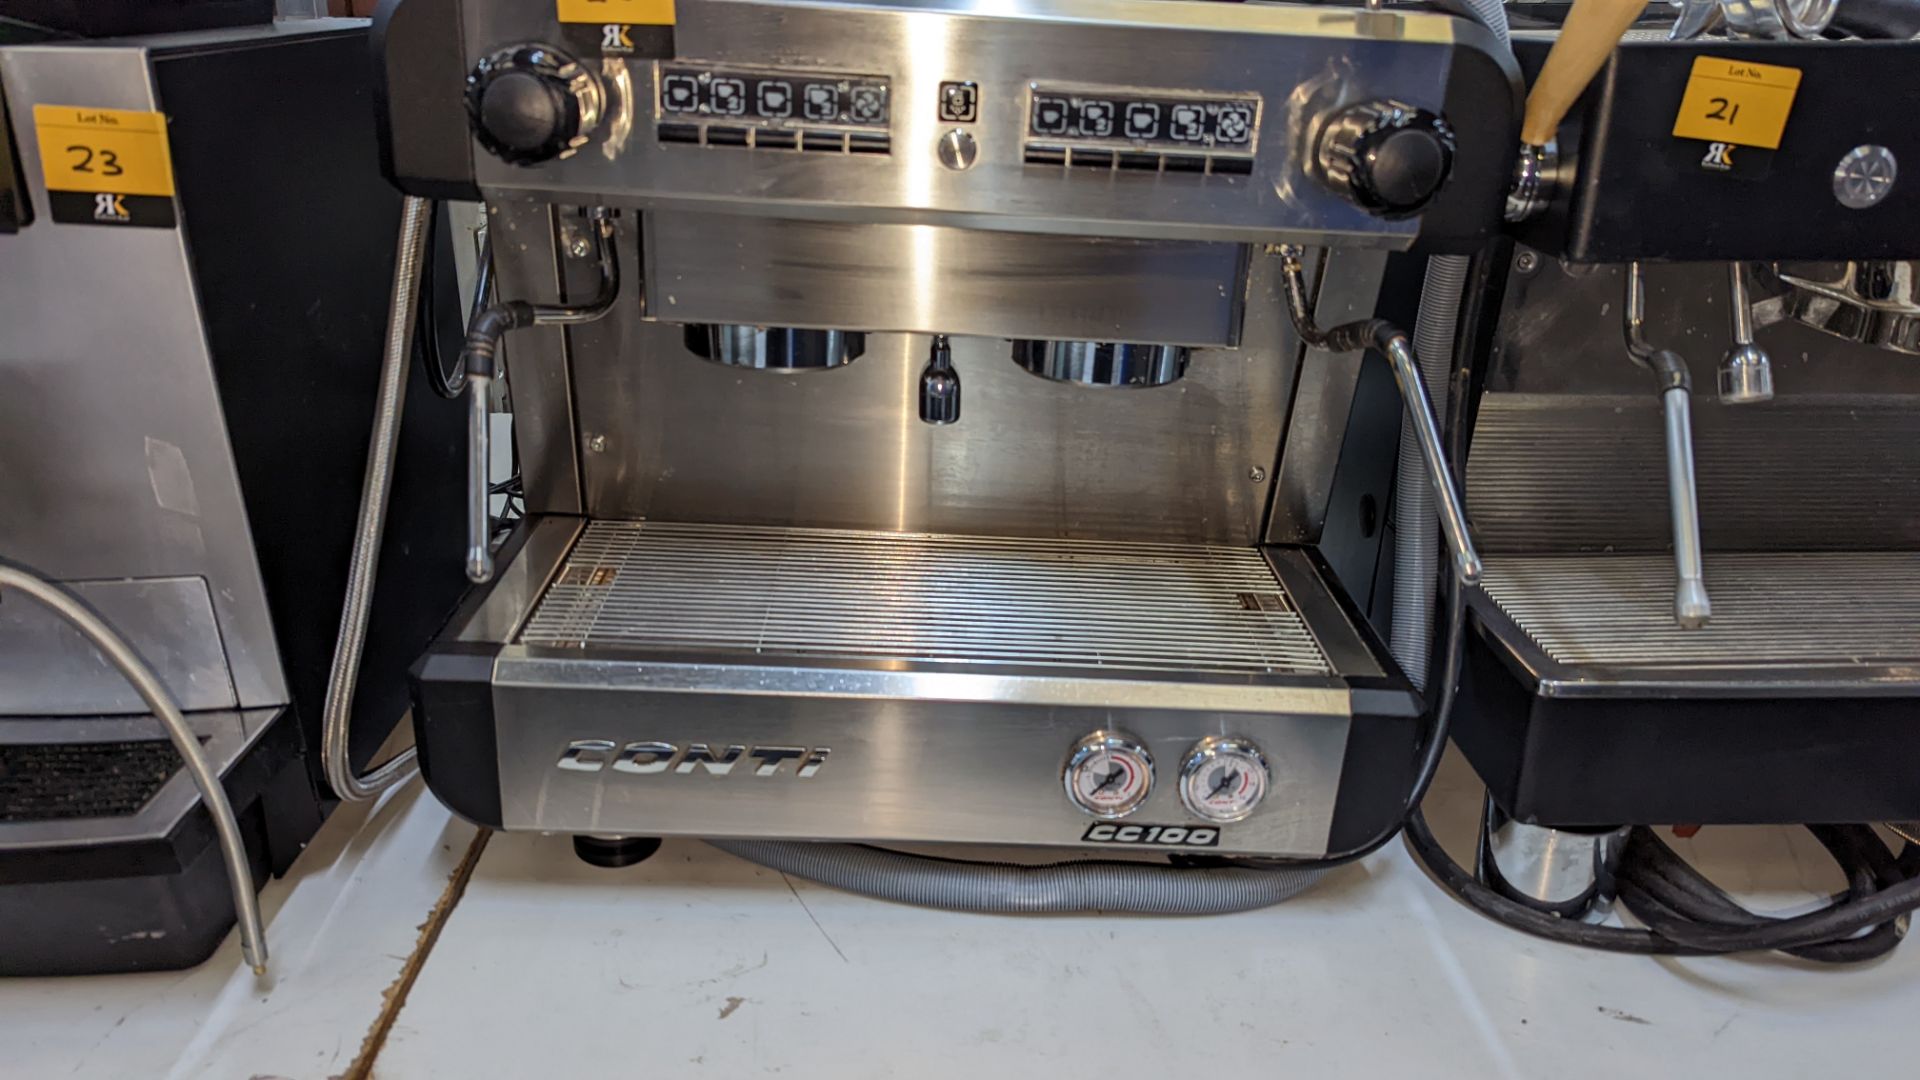 Conti model CC100 2 Group commercial coffee machine including water filter plus other ancillaries as - Image 3 of 10